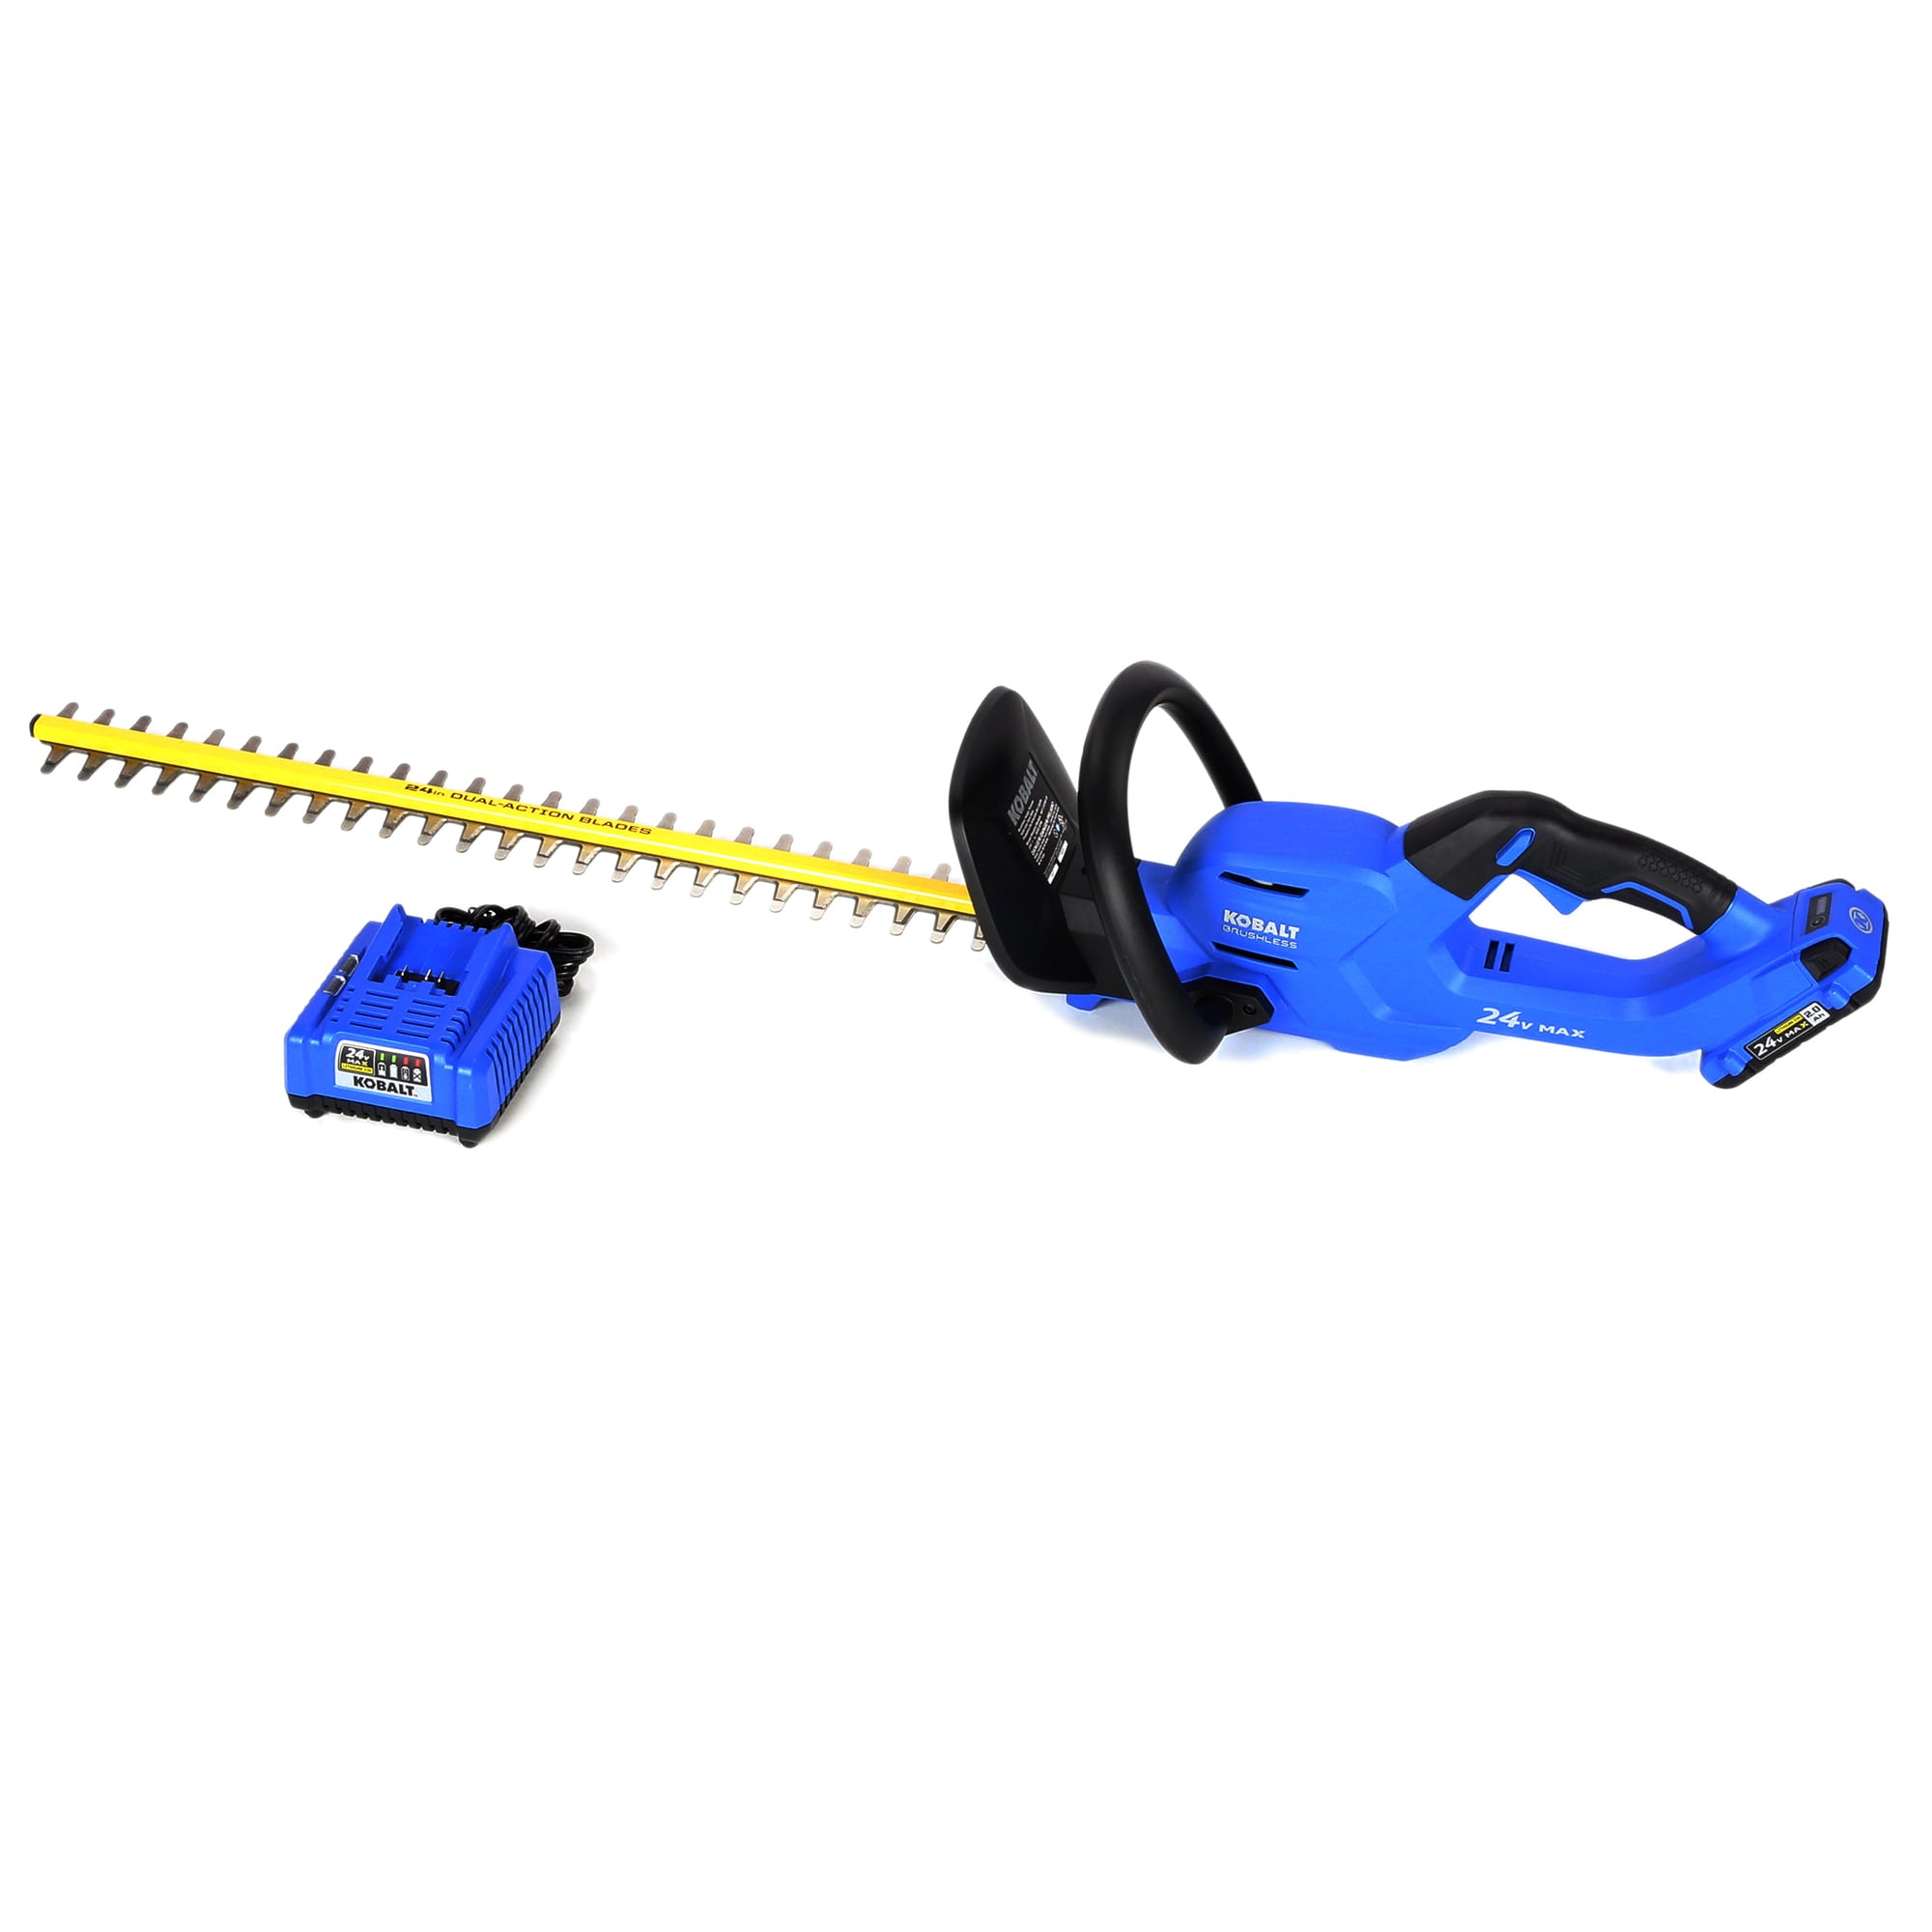 Kobalt 24-Volt Max 24-in Dual Cordless Electric Hedge Trimmer (1-Battery Included)